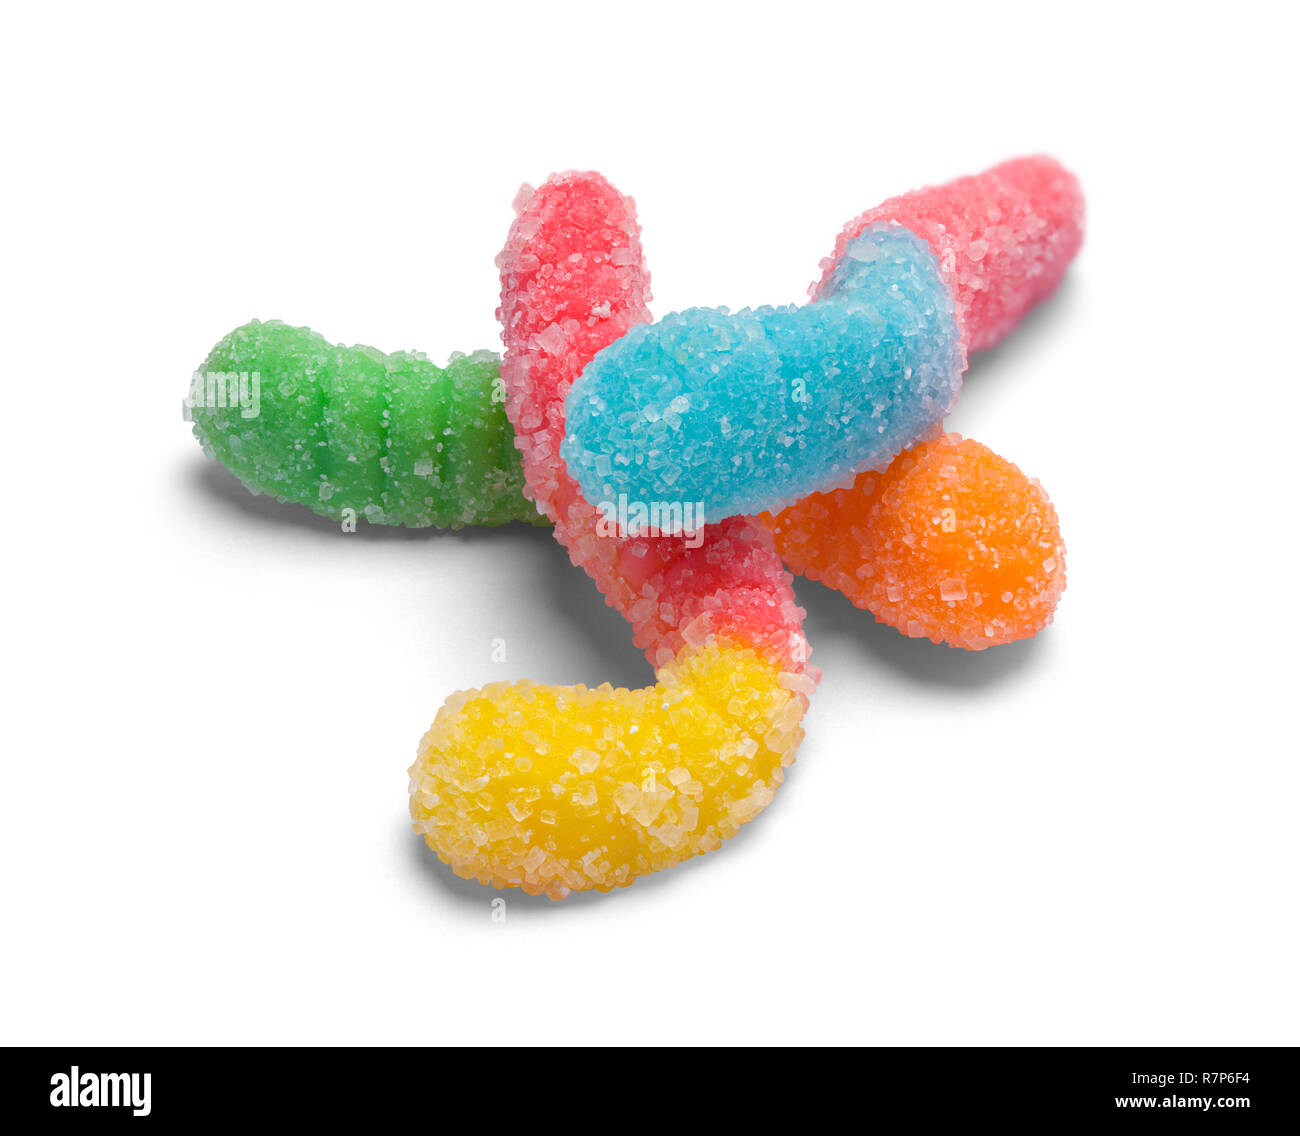 Small Pile of Gummy Worms Isolated on White Background. Stock Photo